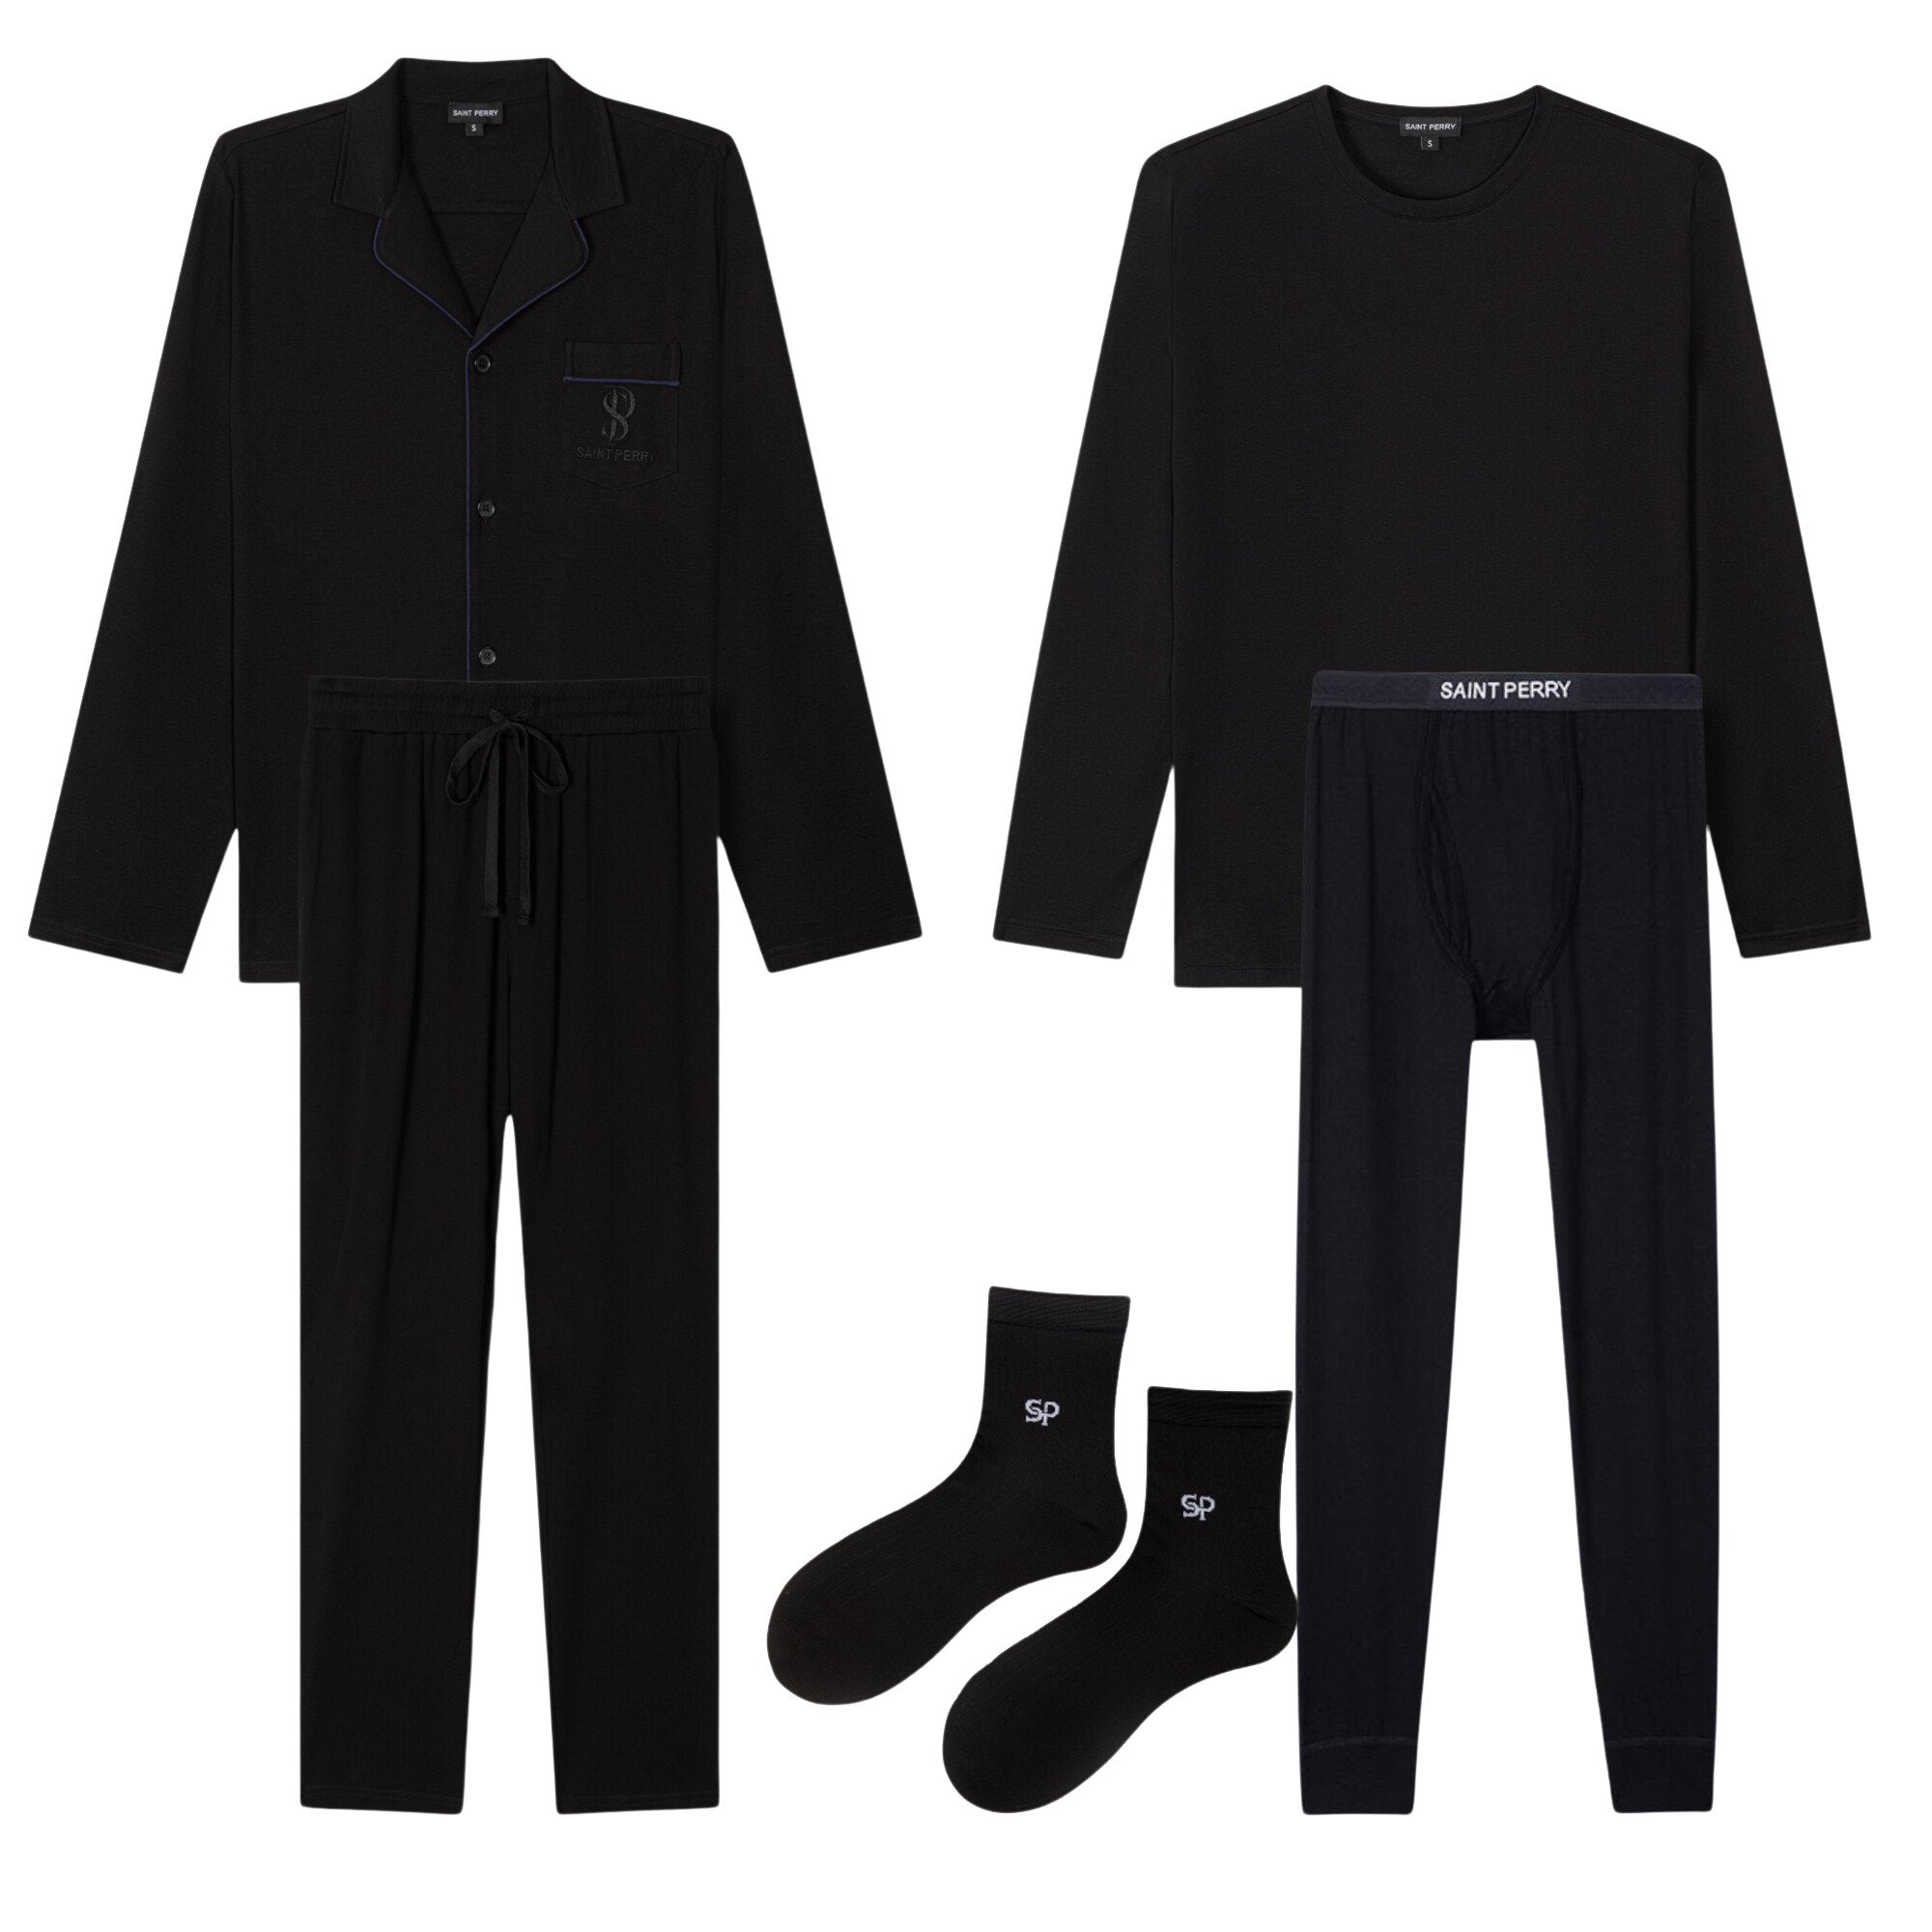 Leisurely & Thermal Black Sets - SAINT PERRY